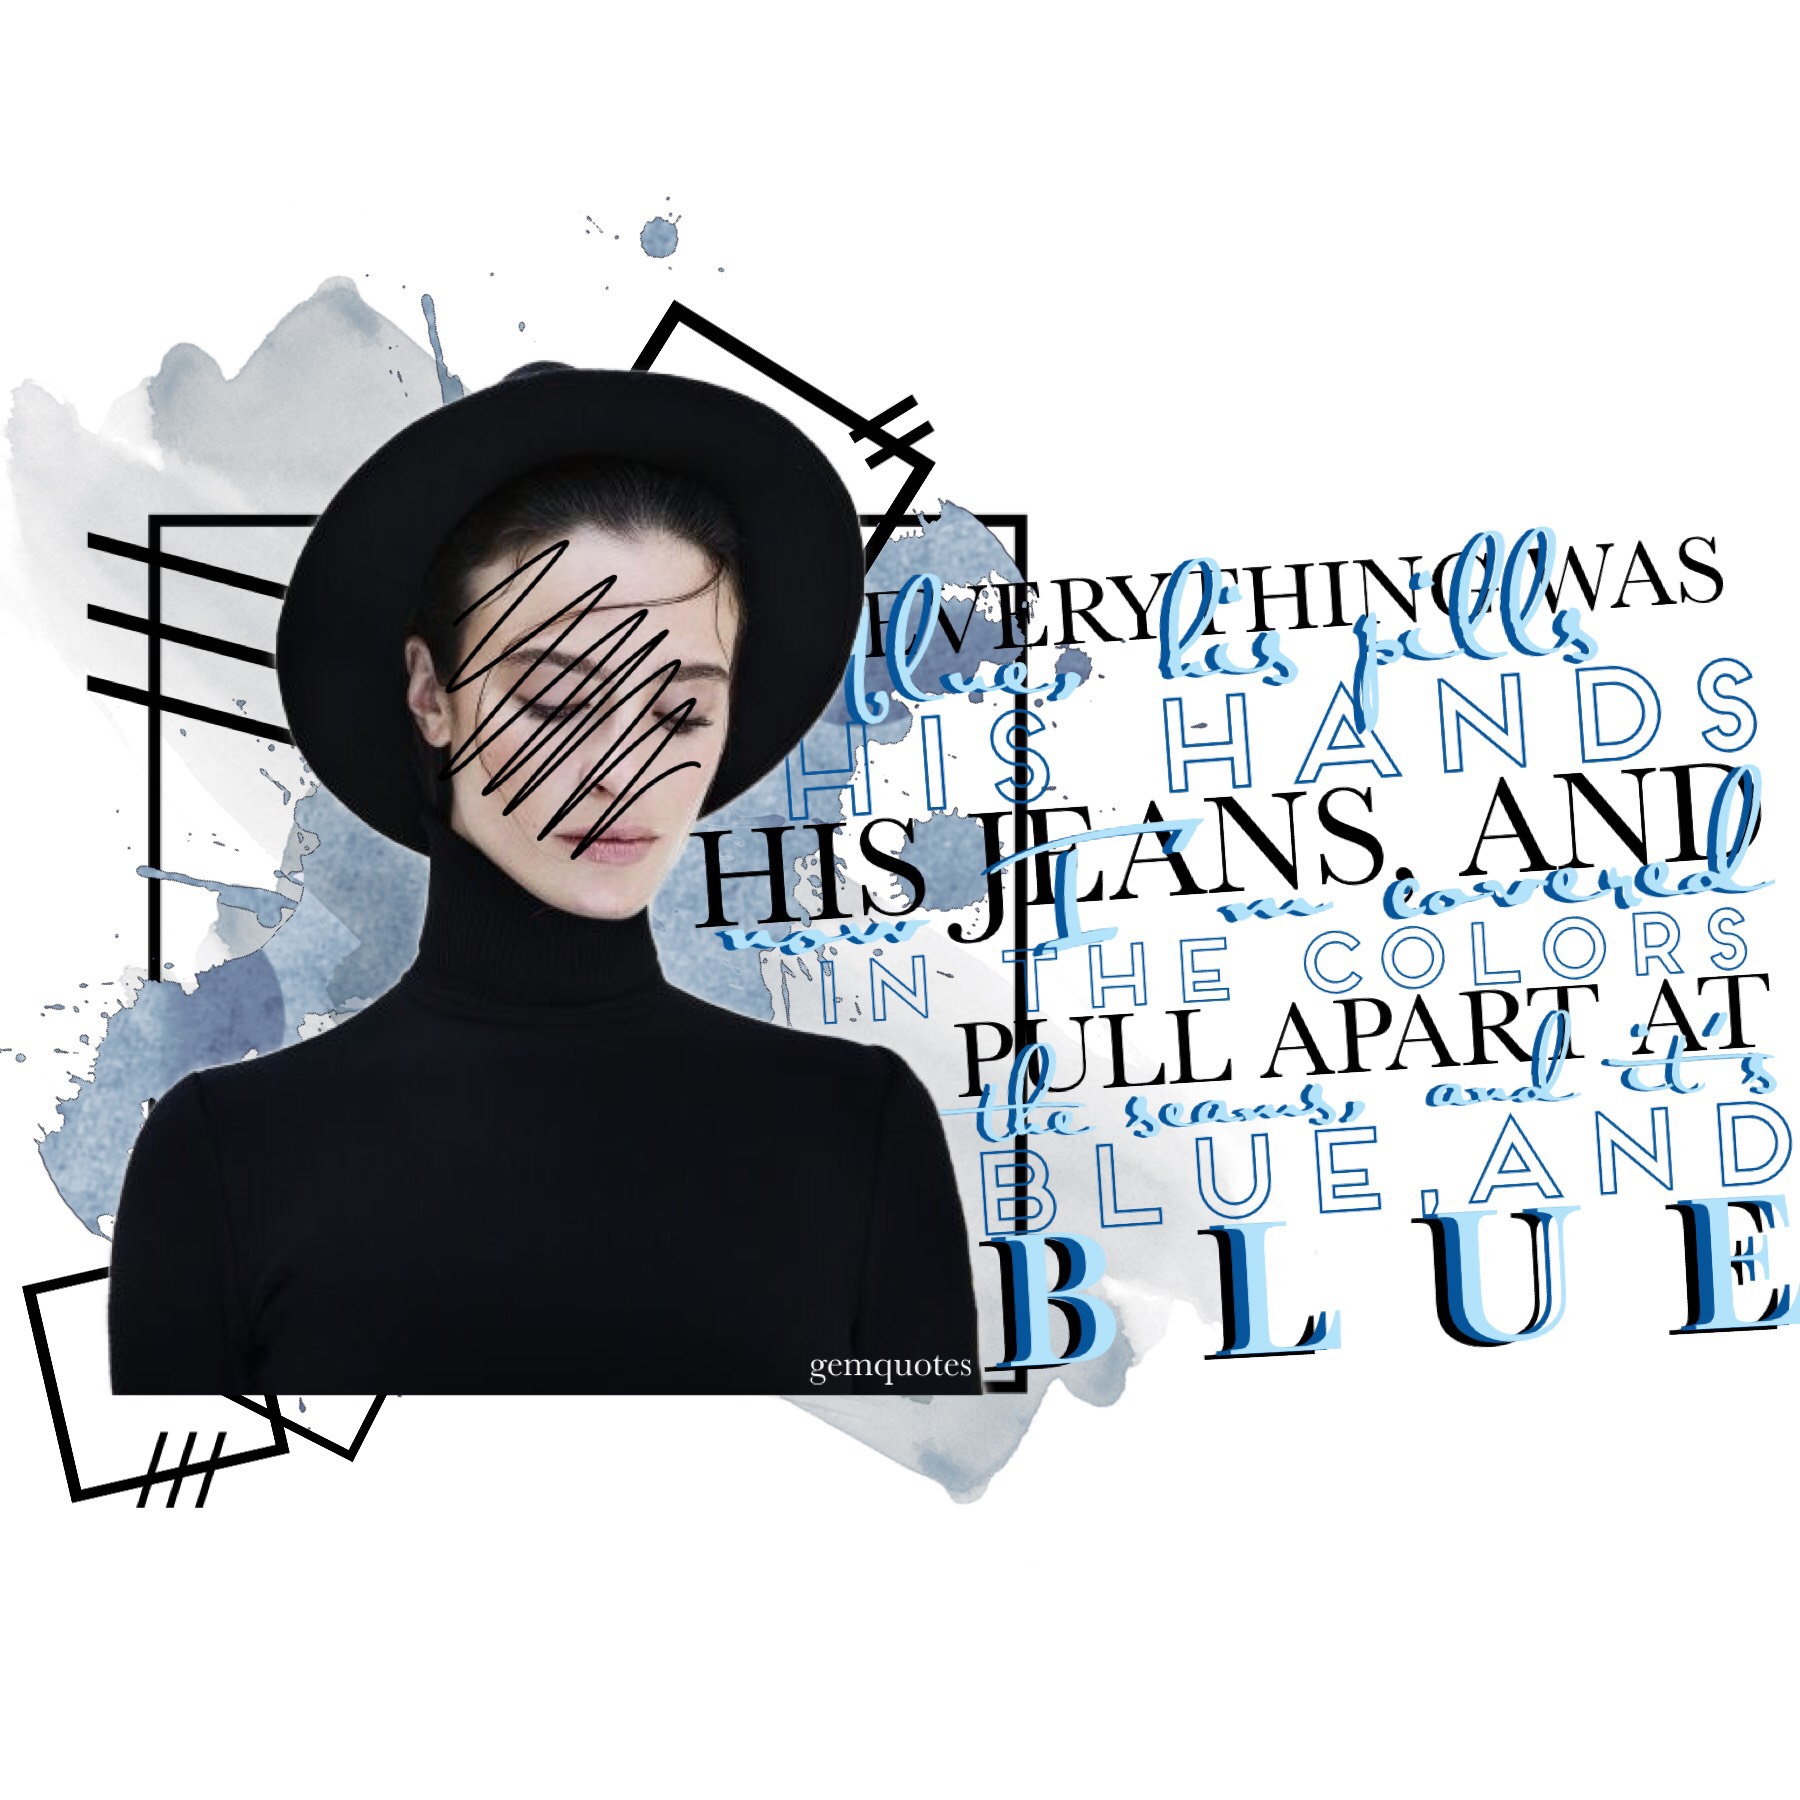 “💙tap💙”
I know it’s not the best I apologize😅 “Colors” by Halsey! How r u all feeling about my more collage-y , abstract type of edits? Lemme know. Currently (finally) reading “Ravensong”! It’s. Amazing. How r u? Hope ur well! If not, sending all my love 